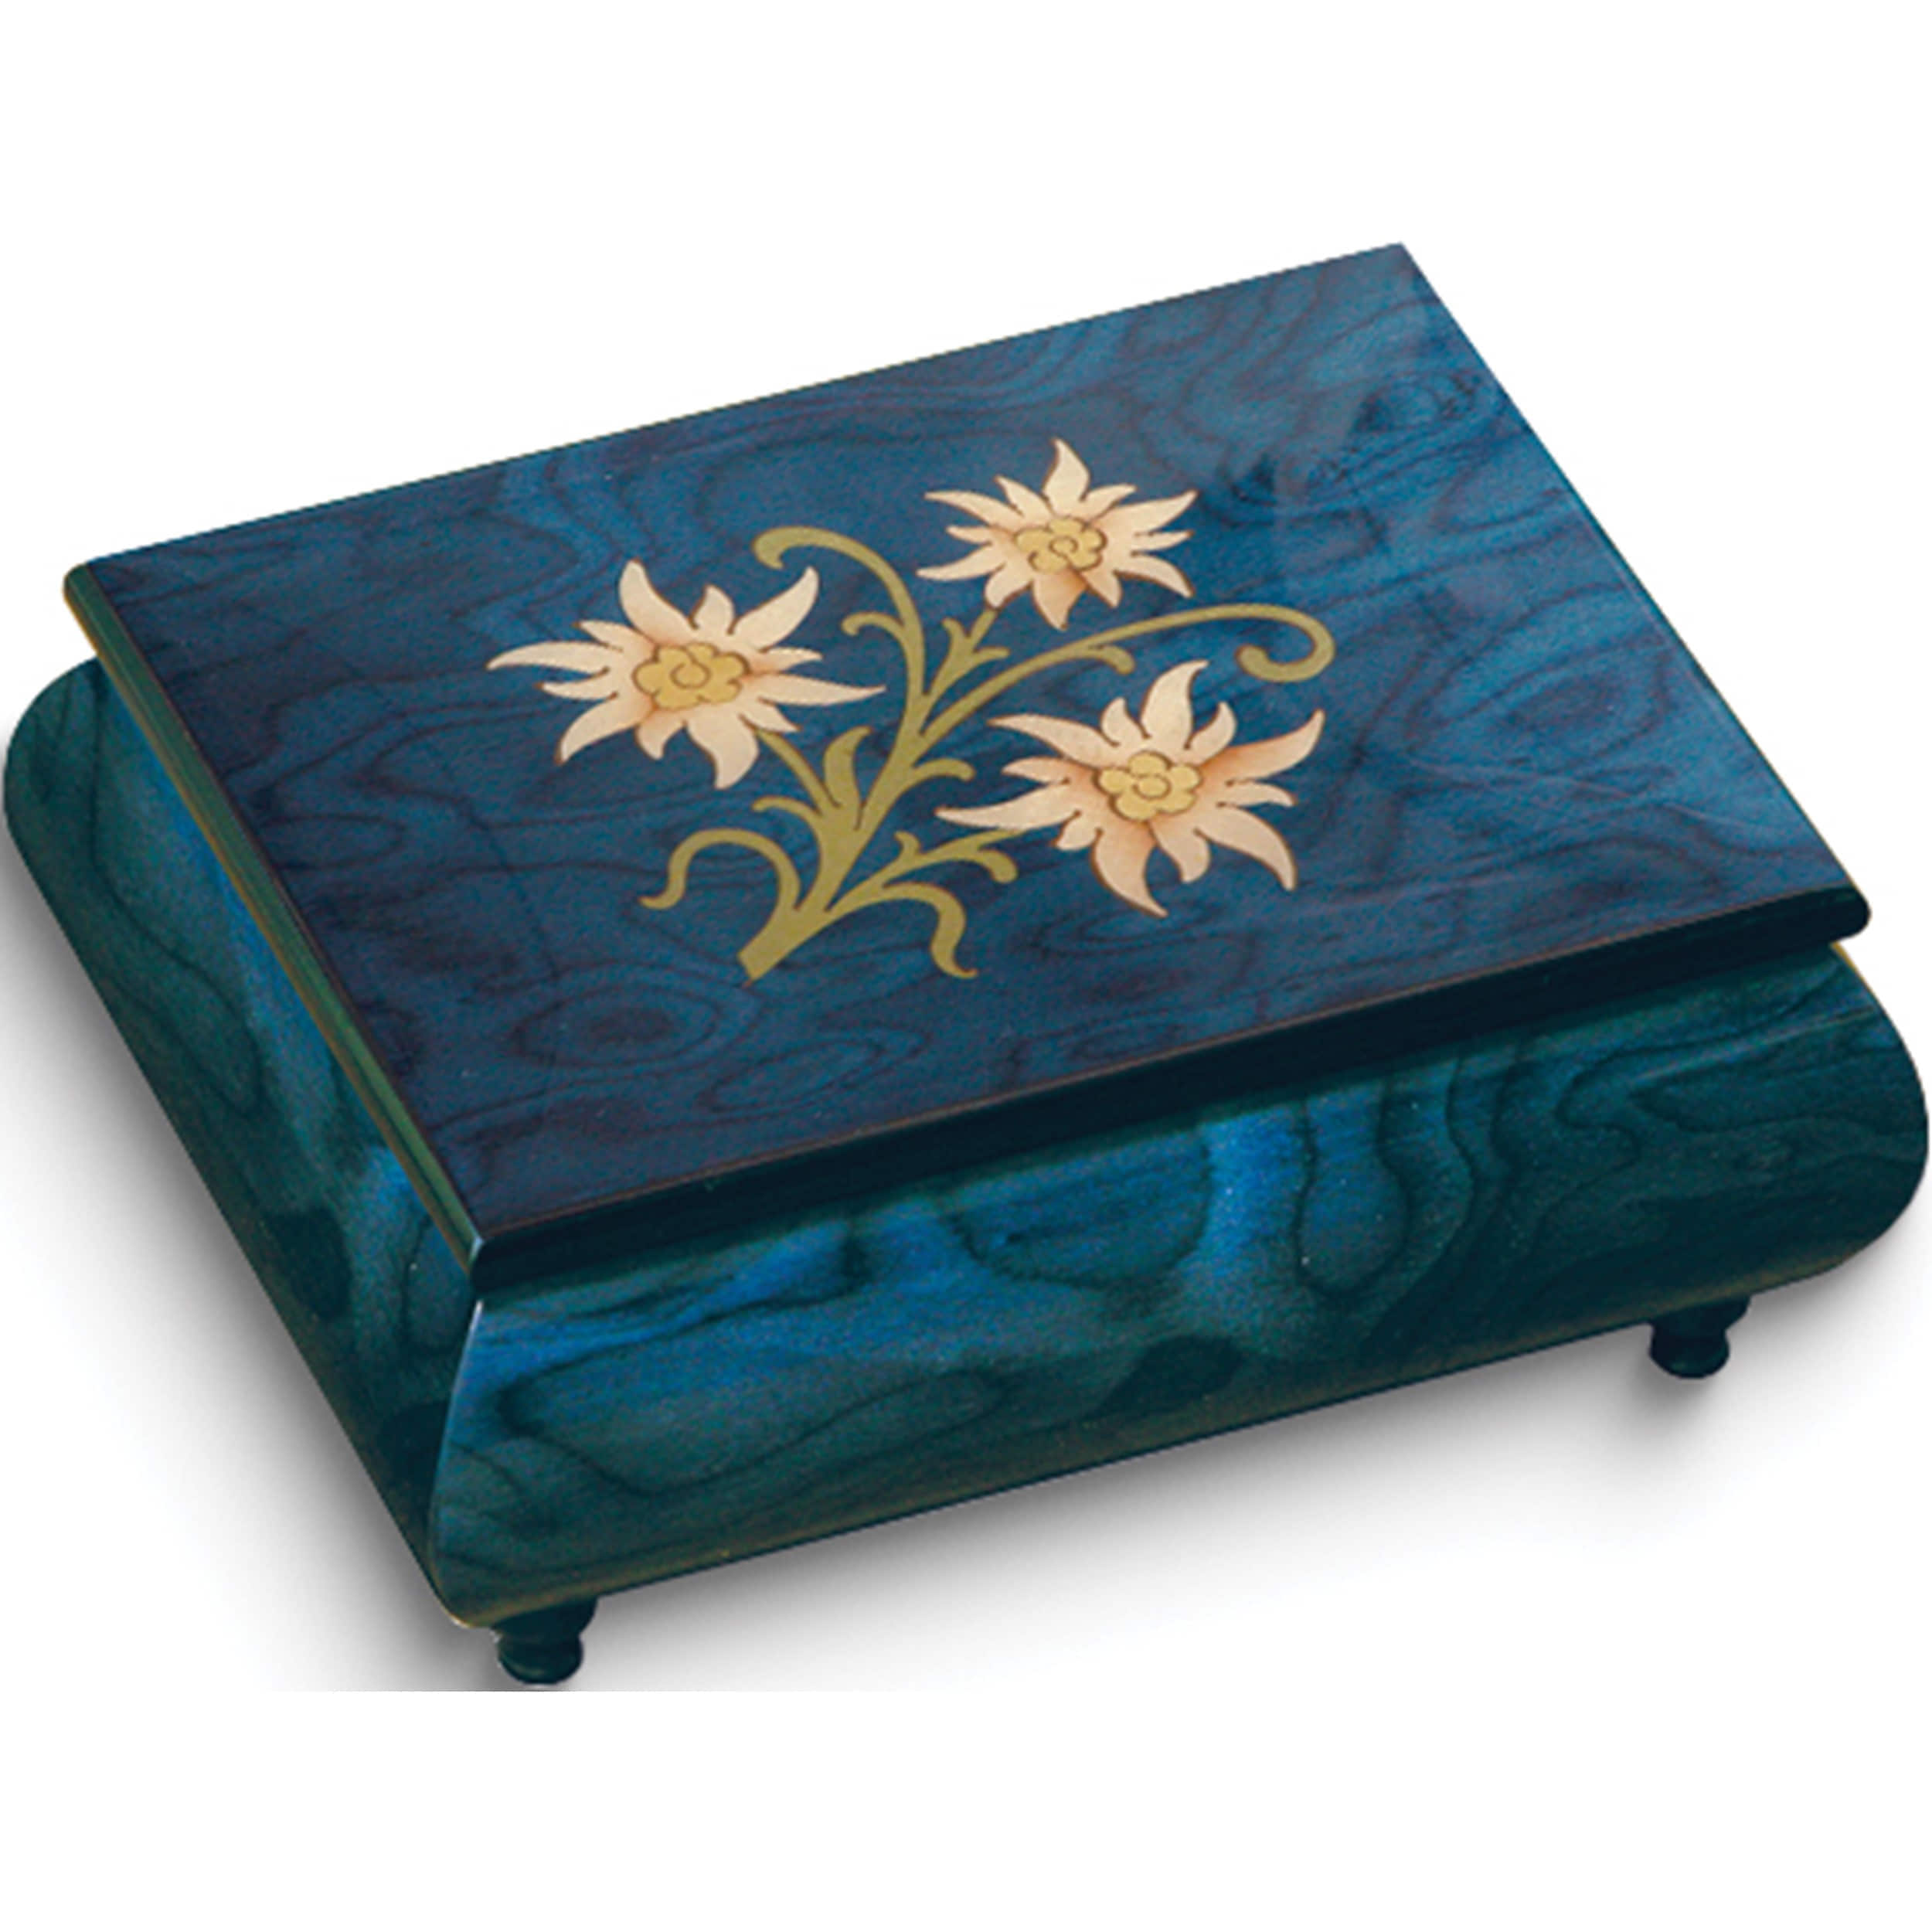 Fashion Blue Floral Inlay Music Box Plays Edelweiss (6 X 4.5) Made In Italy gm7517 - image 1 of 4